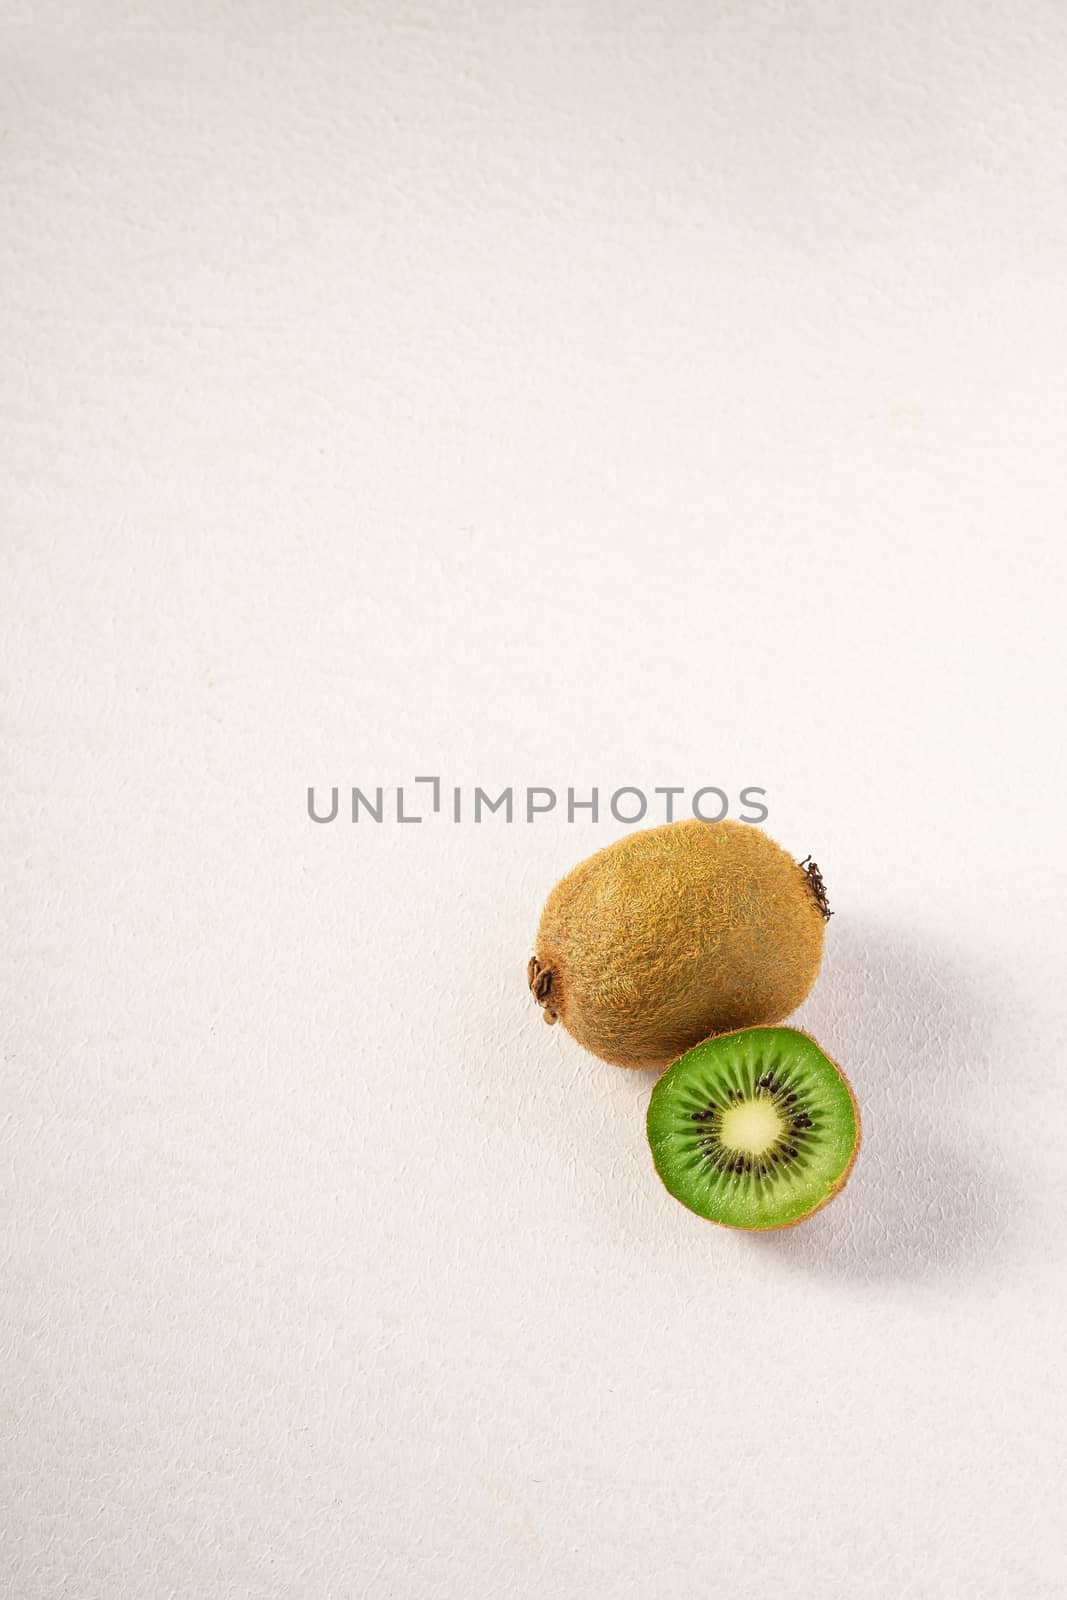 Kiwi fruits half sliced on white background, copy space, top view